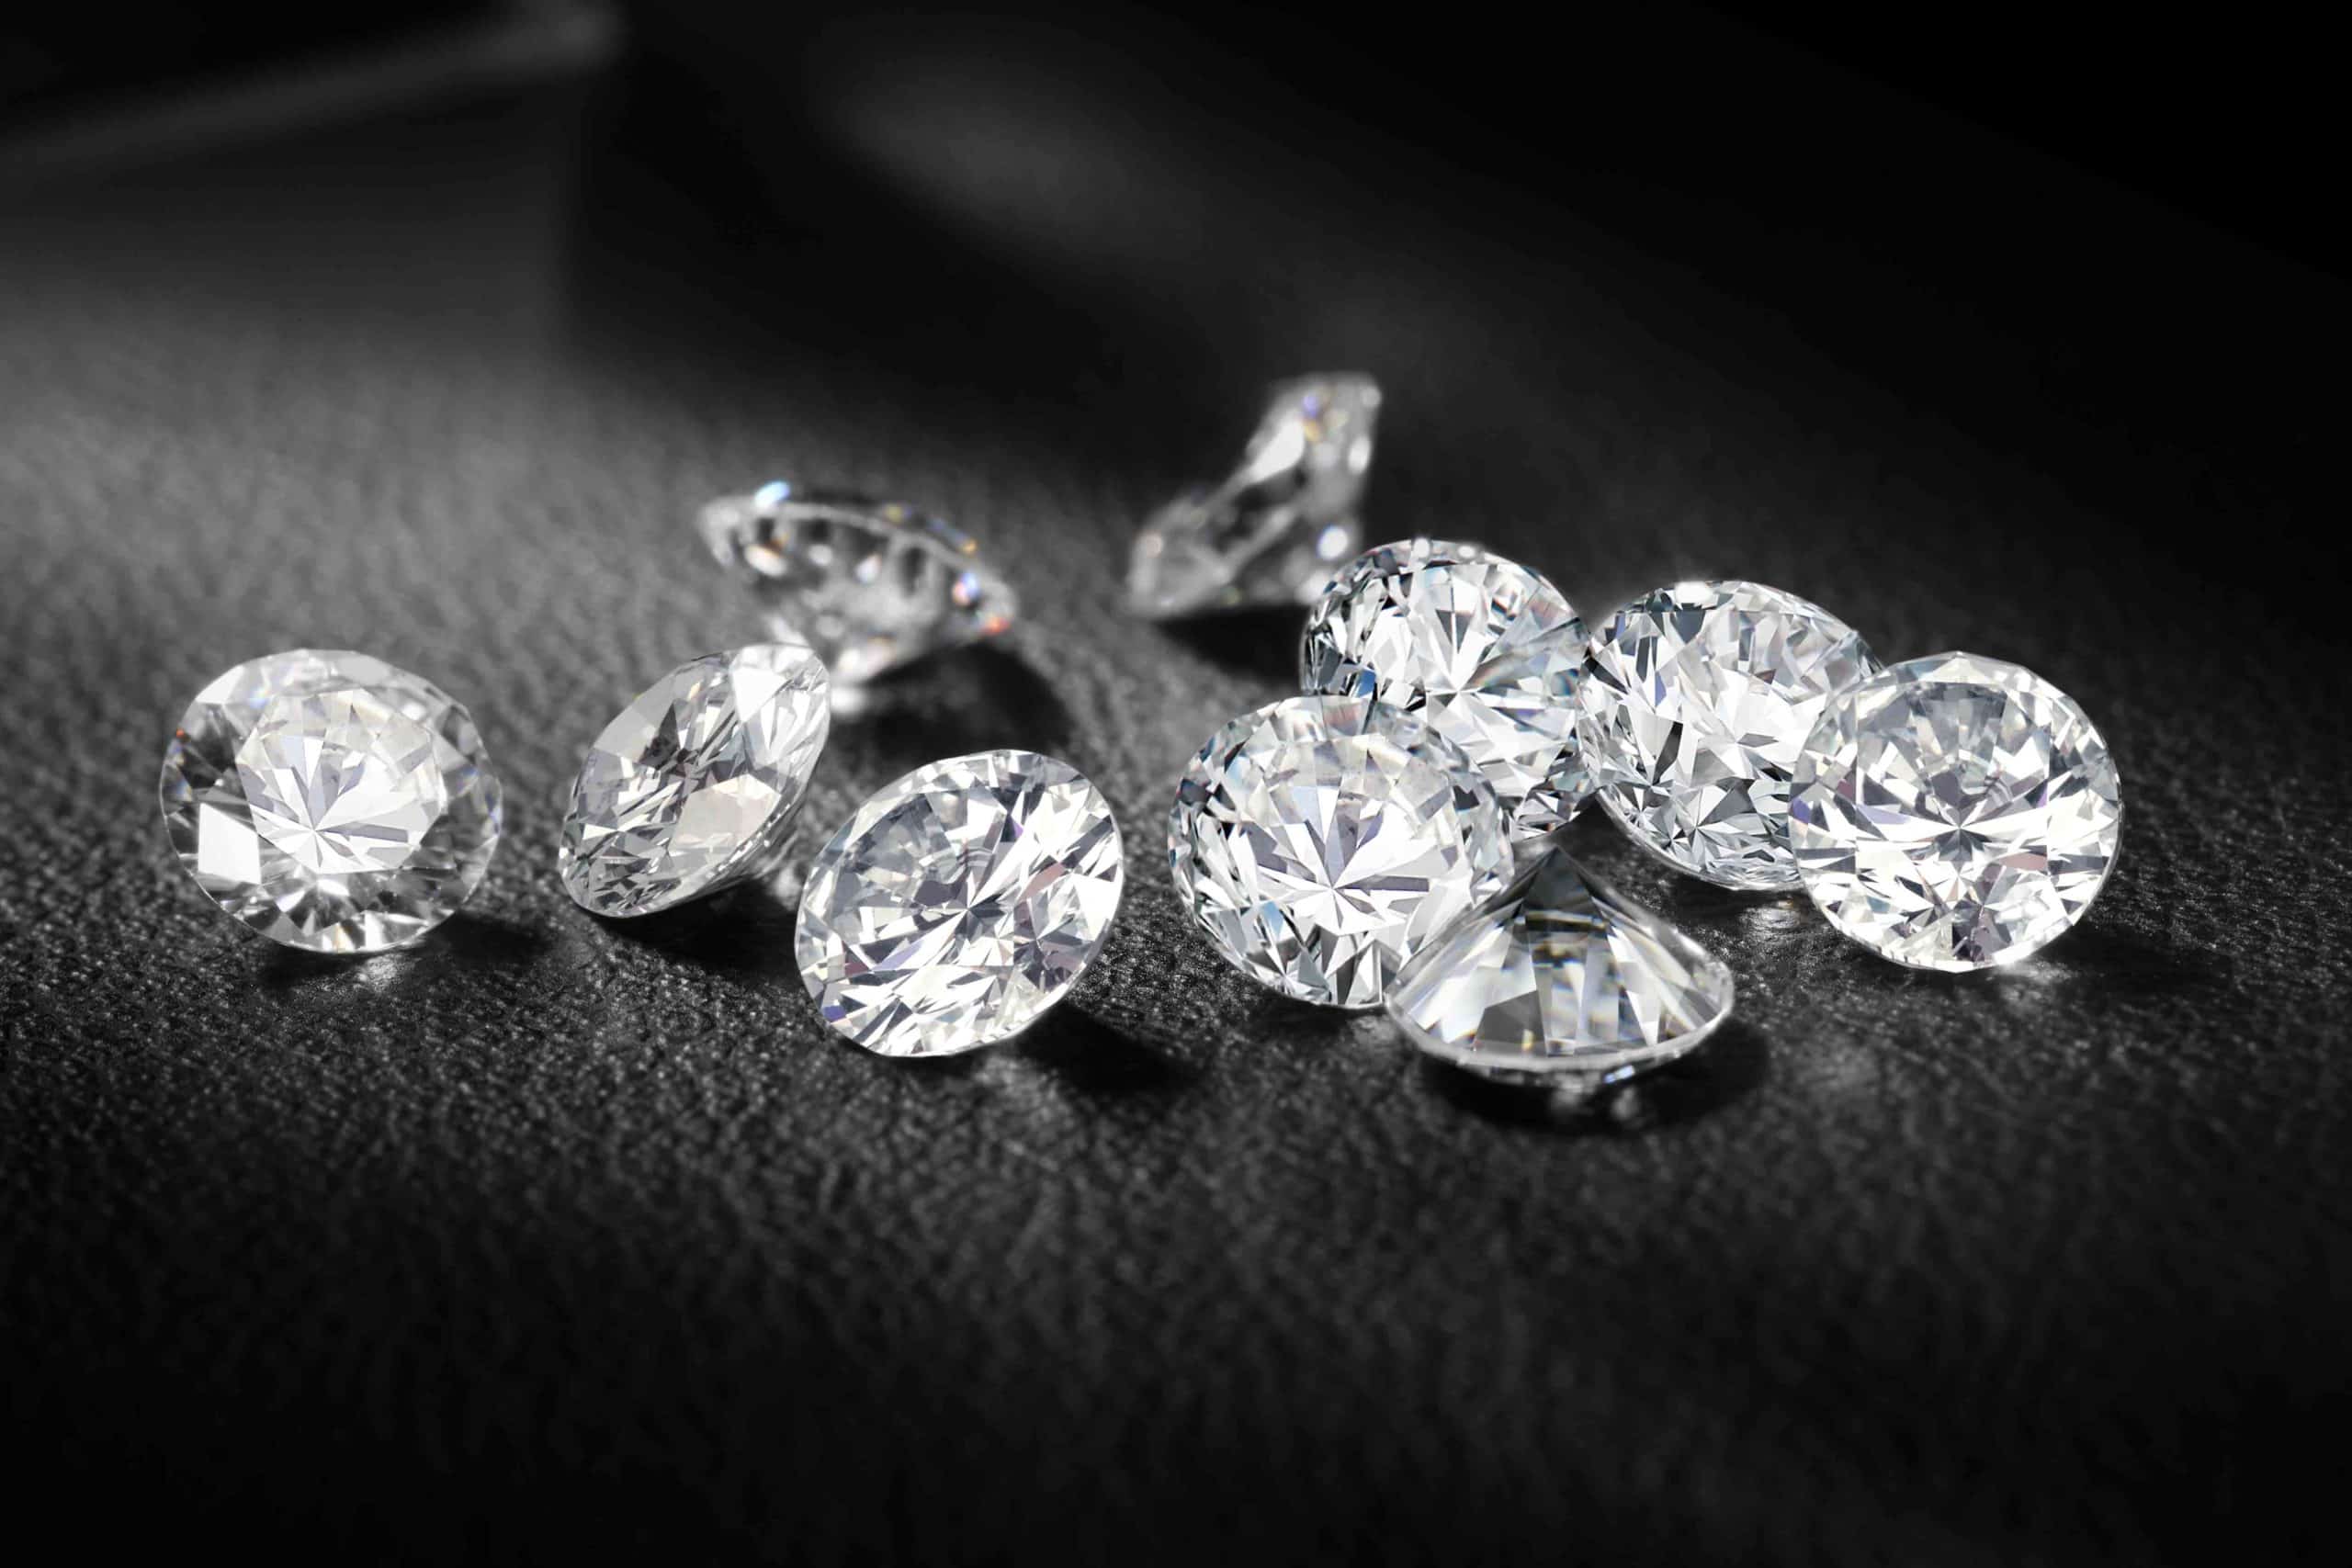 Why Artificial Diamonds Are Best 